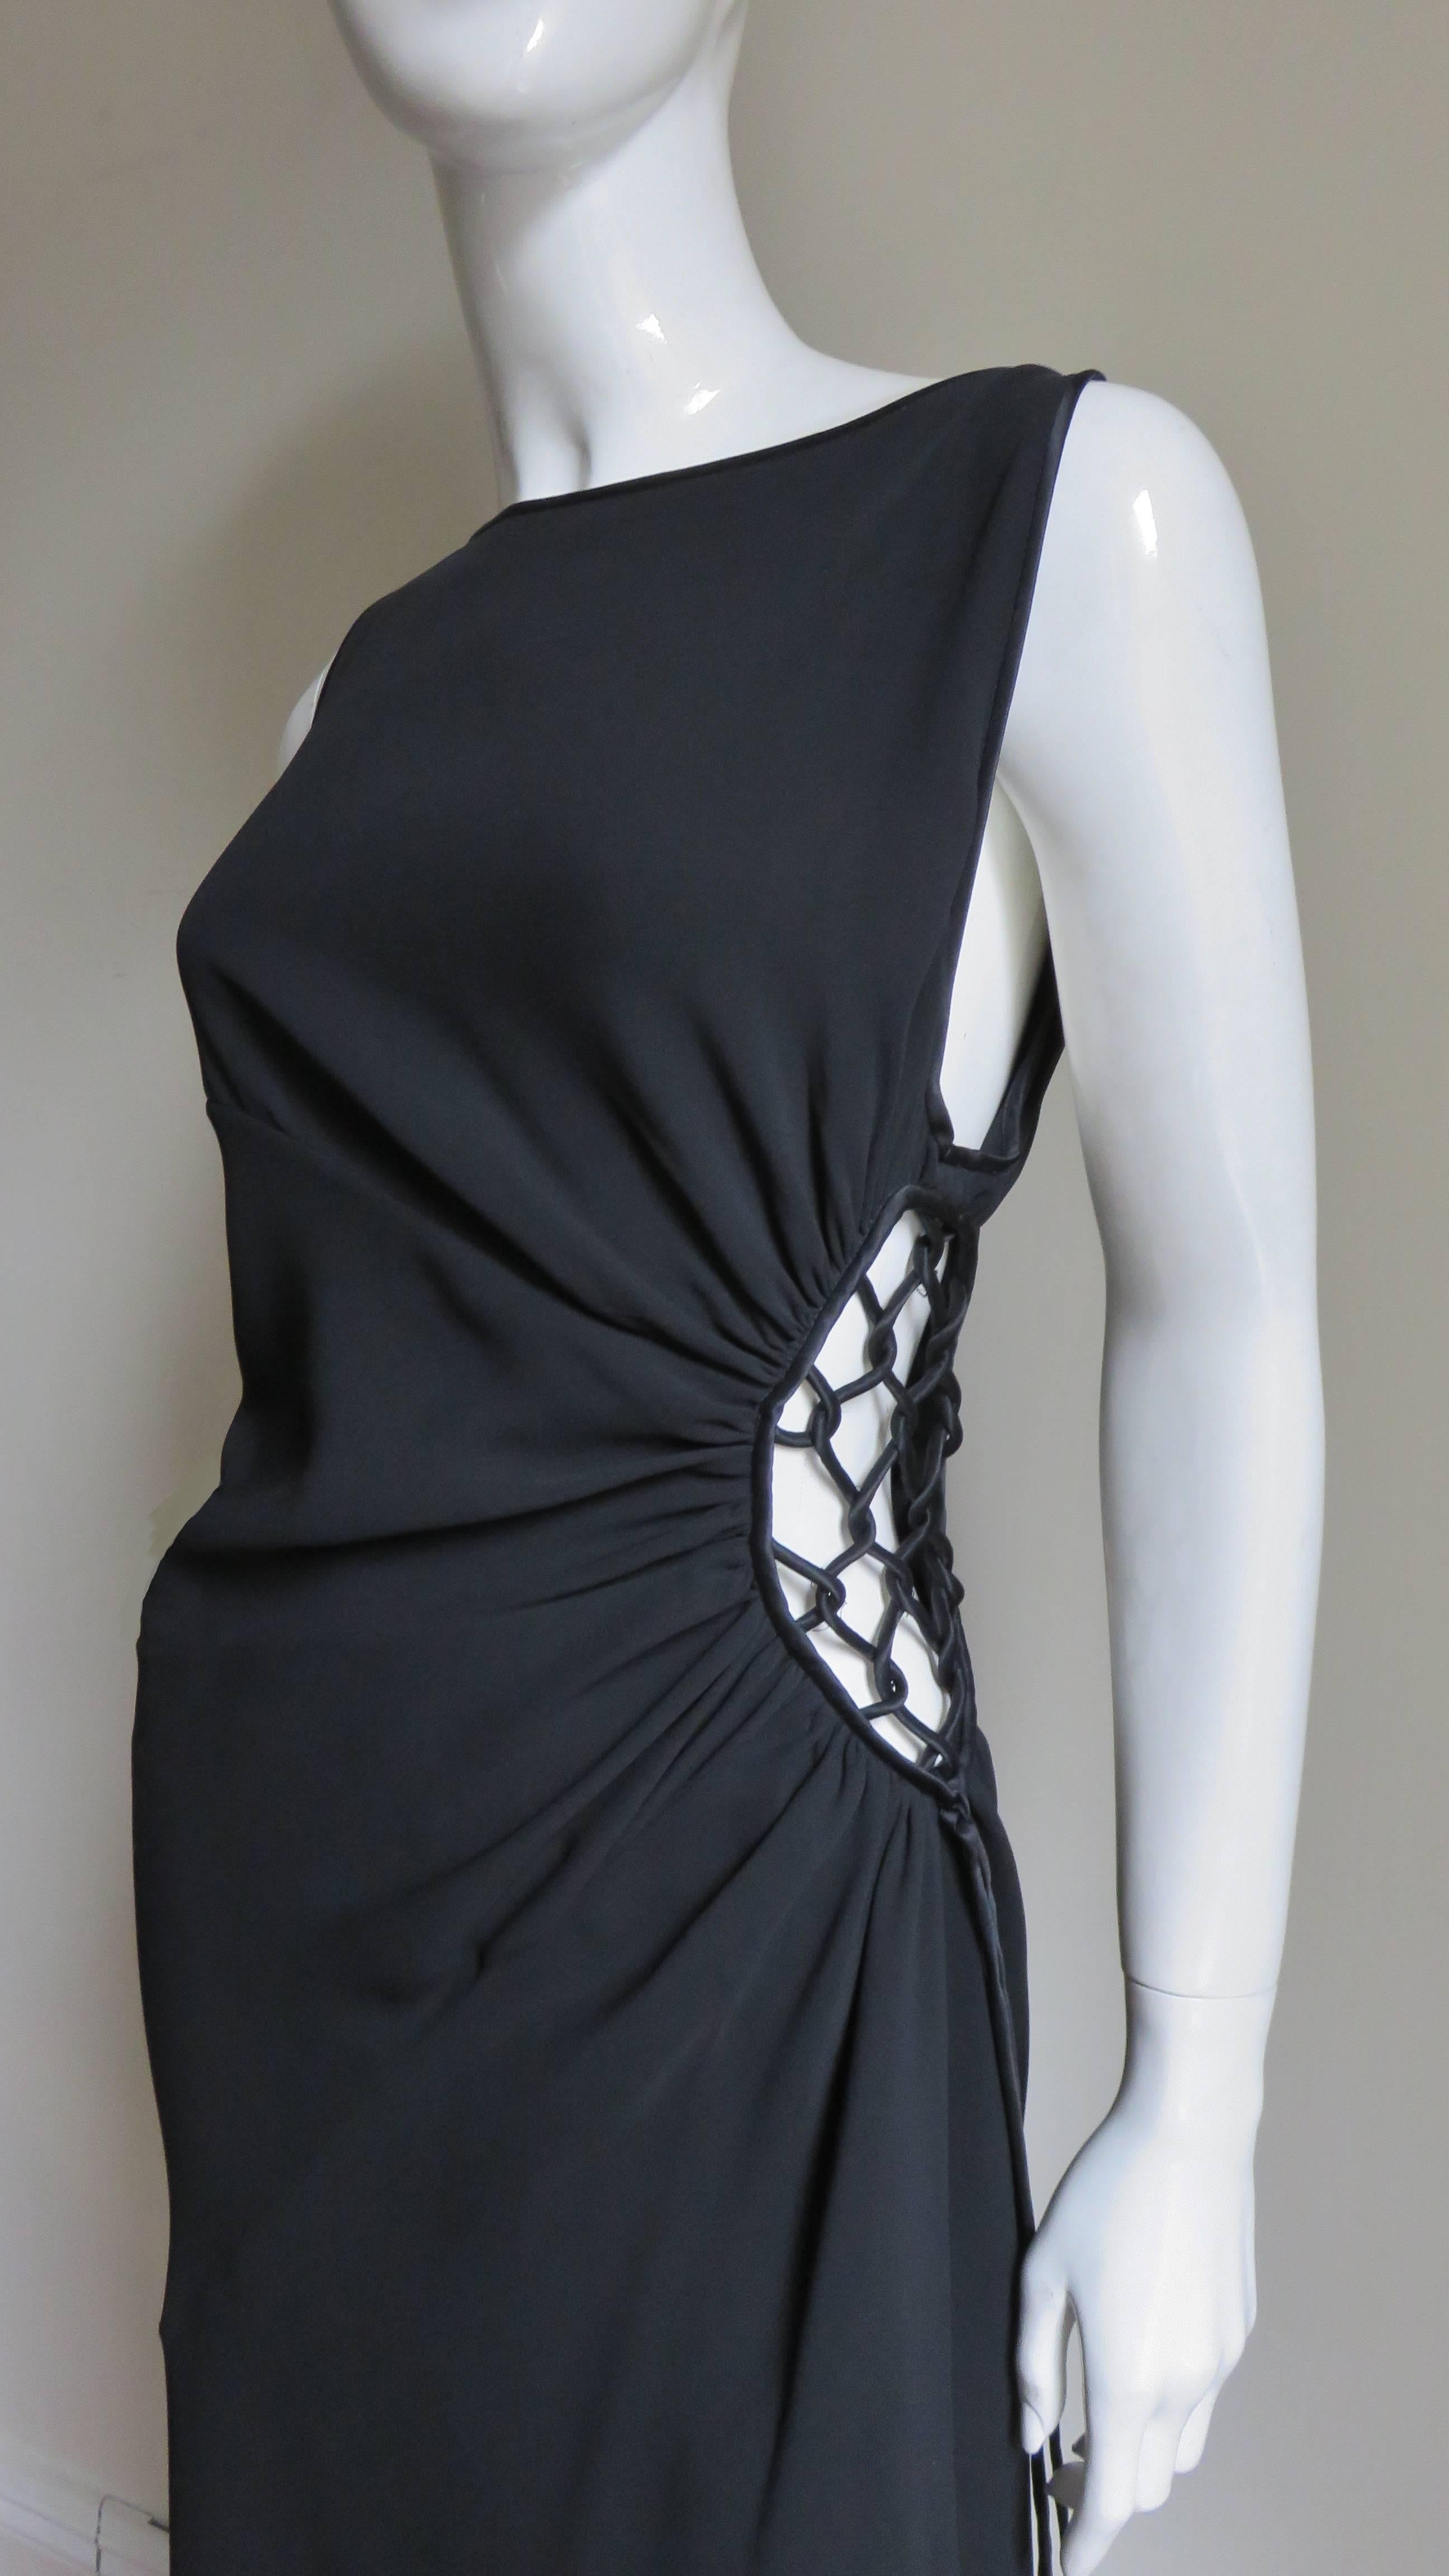 A fabulous black silk gown from Valentino.  It is sleeveless with a bateau neckline and a large oval cut out at one side with woven black silk piping over it.  There are seams in rays emanating from this cut out creating a slight ruched effect.  The